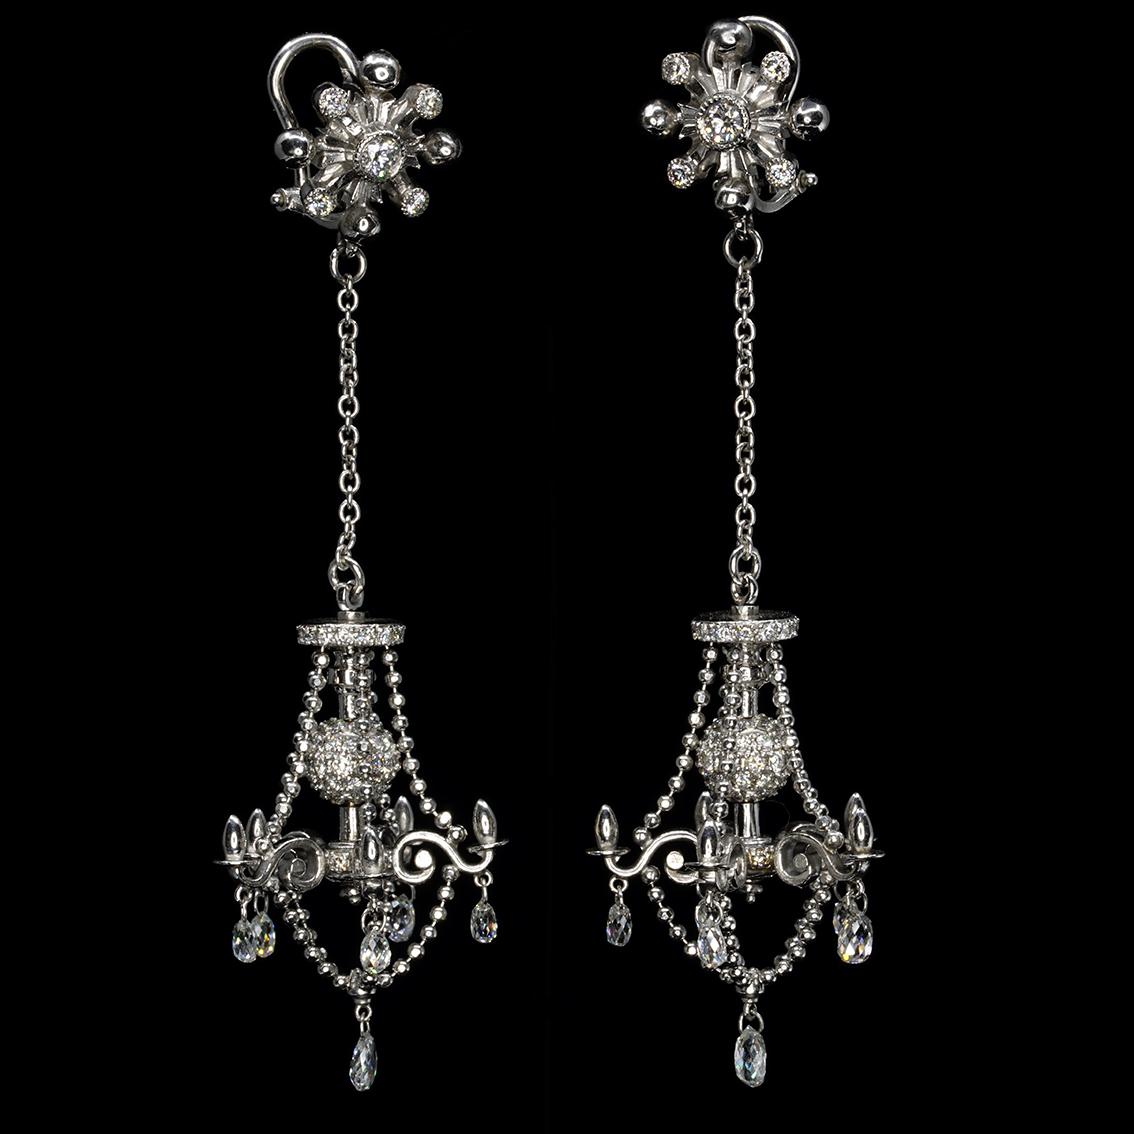 Round Cut 120 White Diamonds and 18k White Gold Victorian Style Chandelier Drop Earrings For Sale